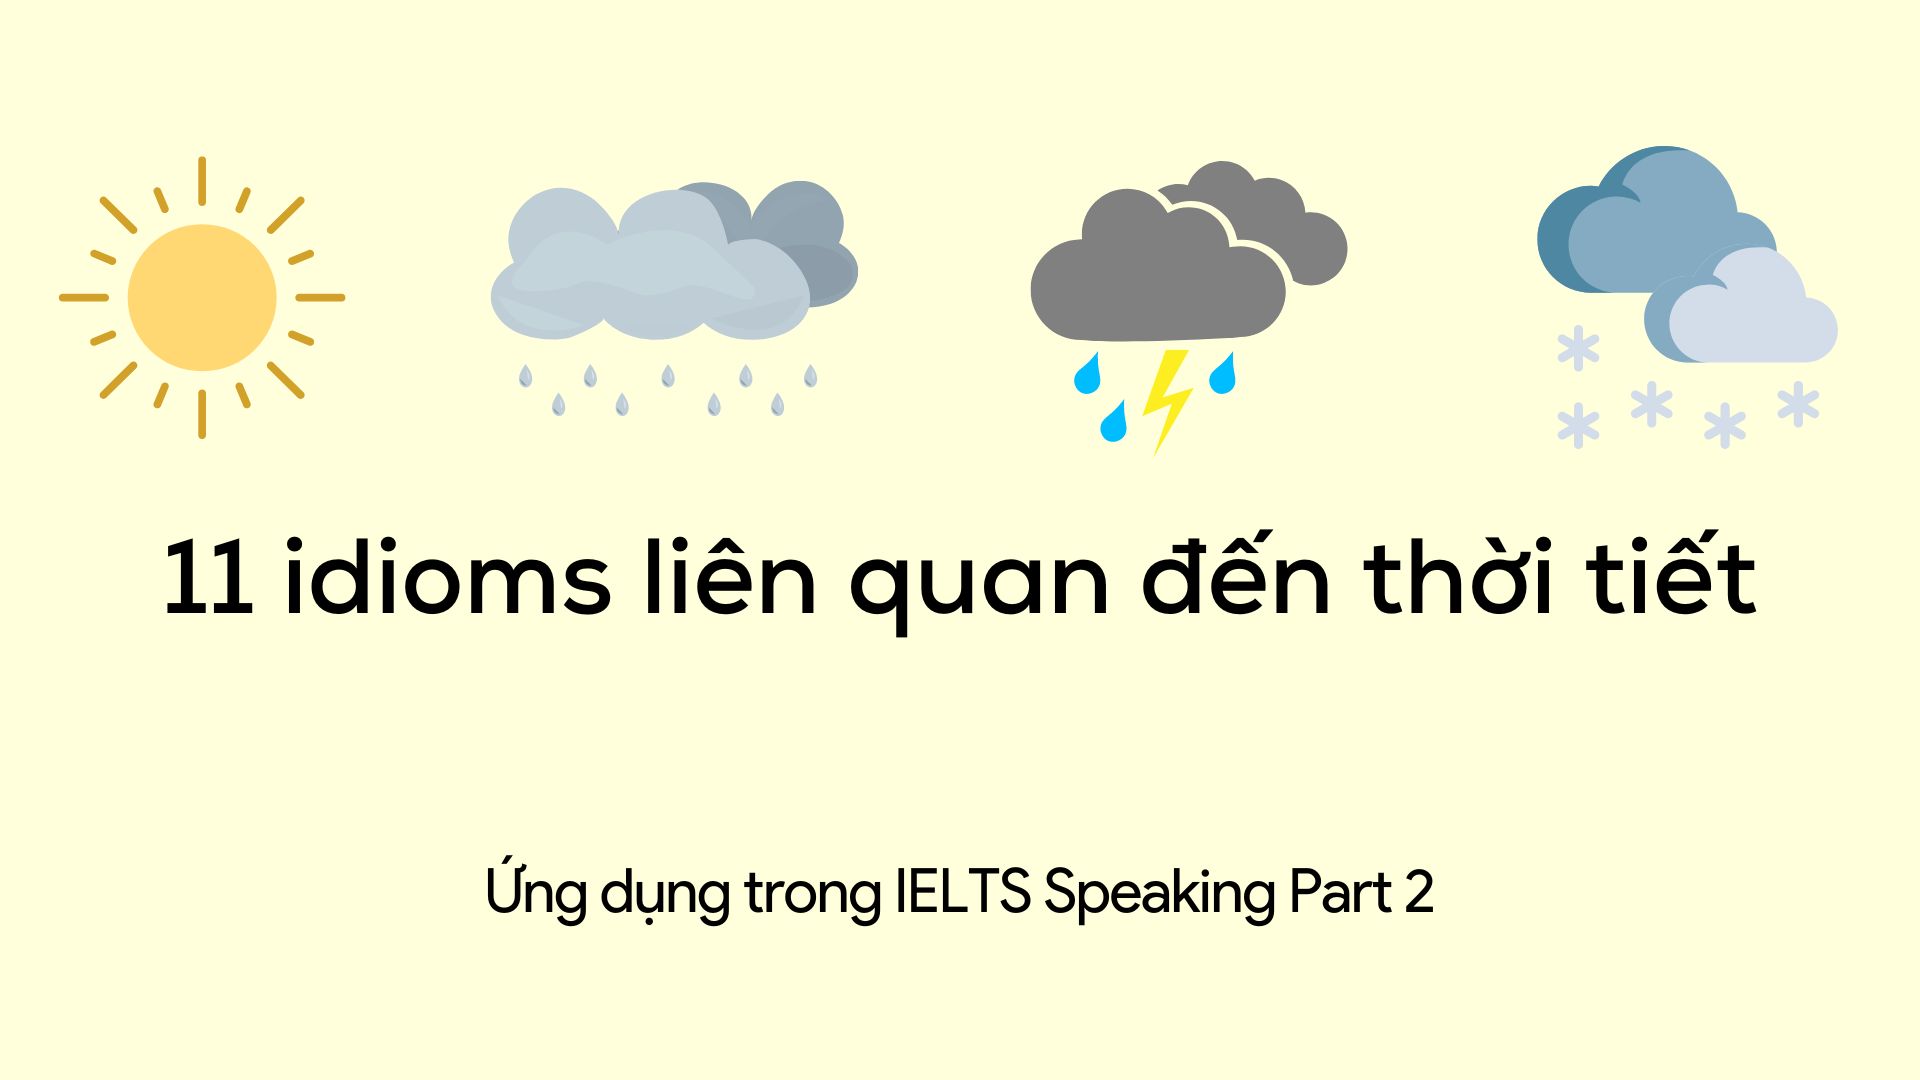 thanh ngu ve thoi tiet ung dung trong ielts speaking part 2